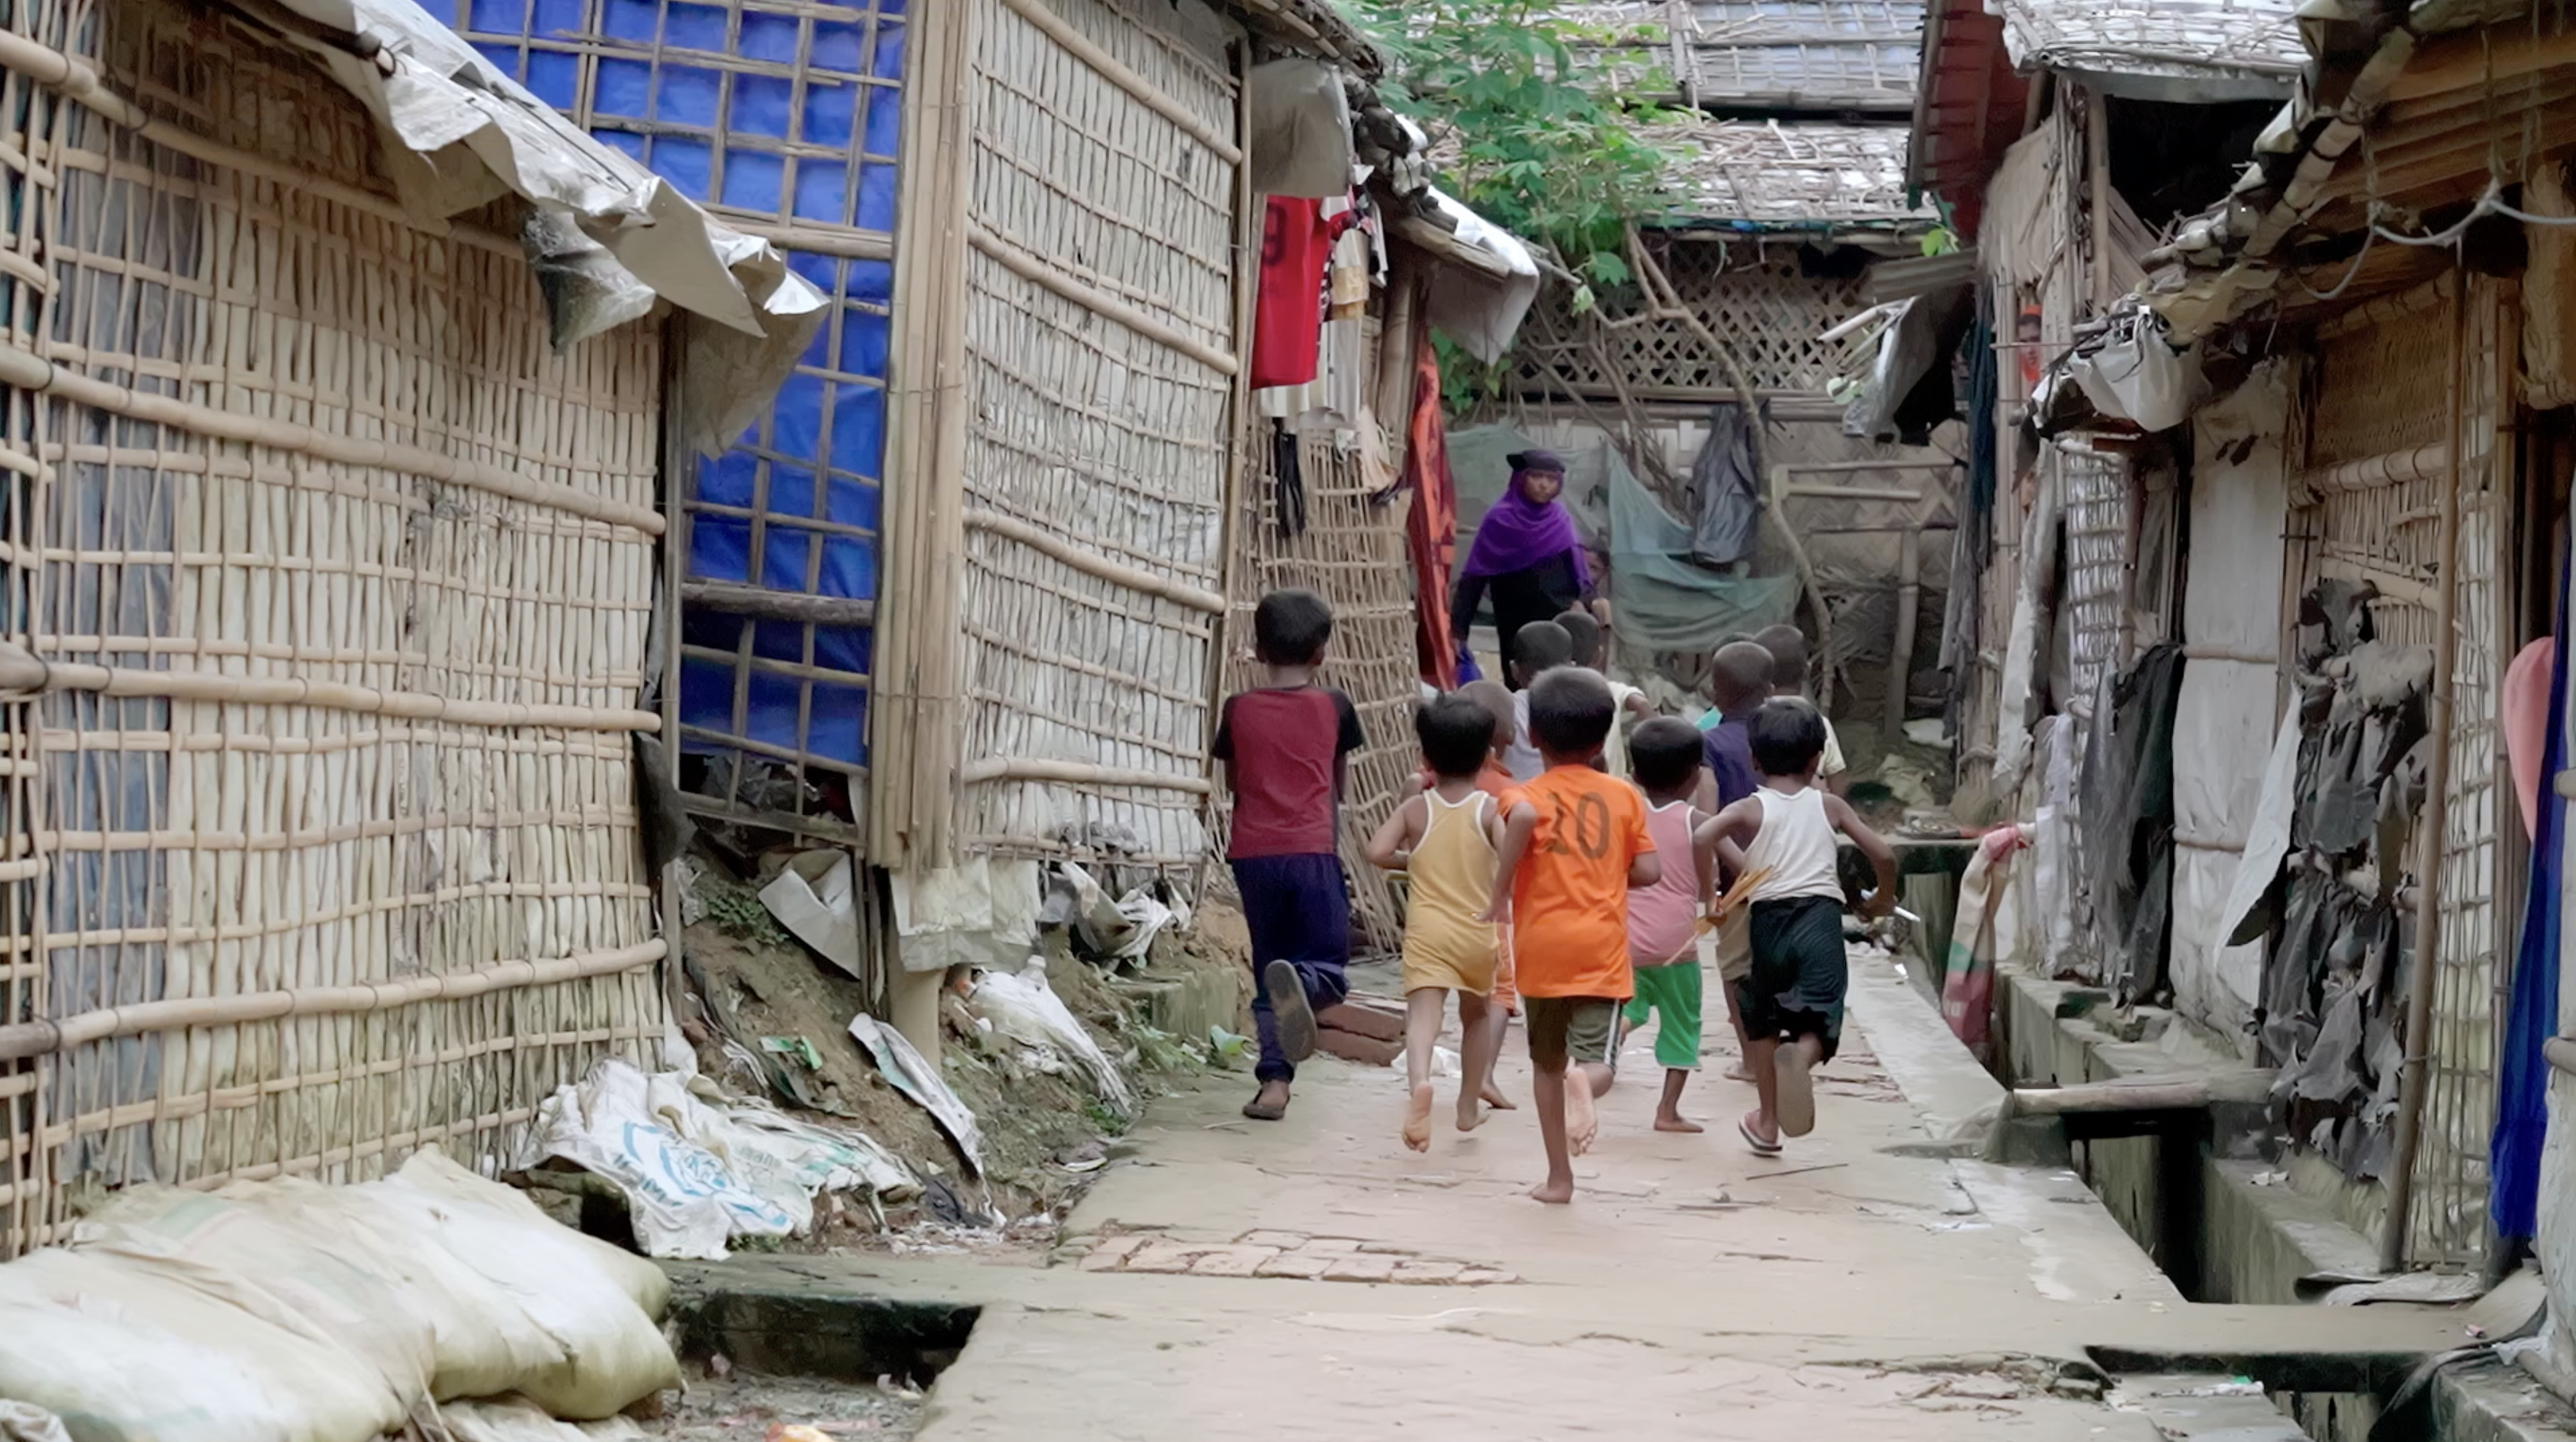 Rohingya youth trapped in violence and despair 